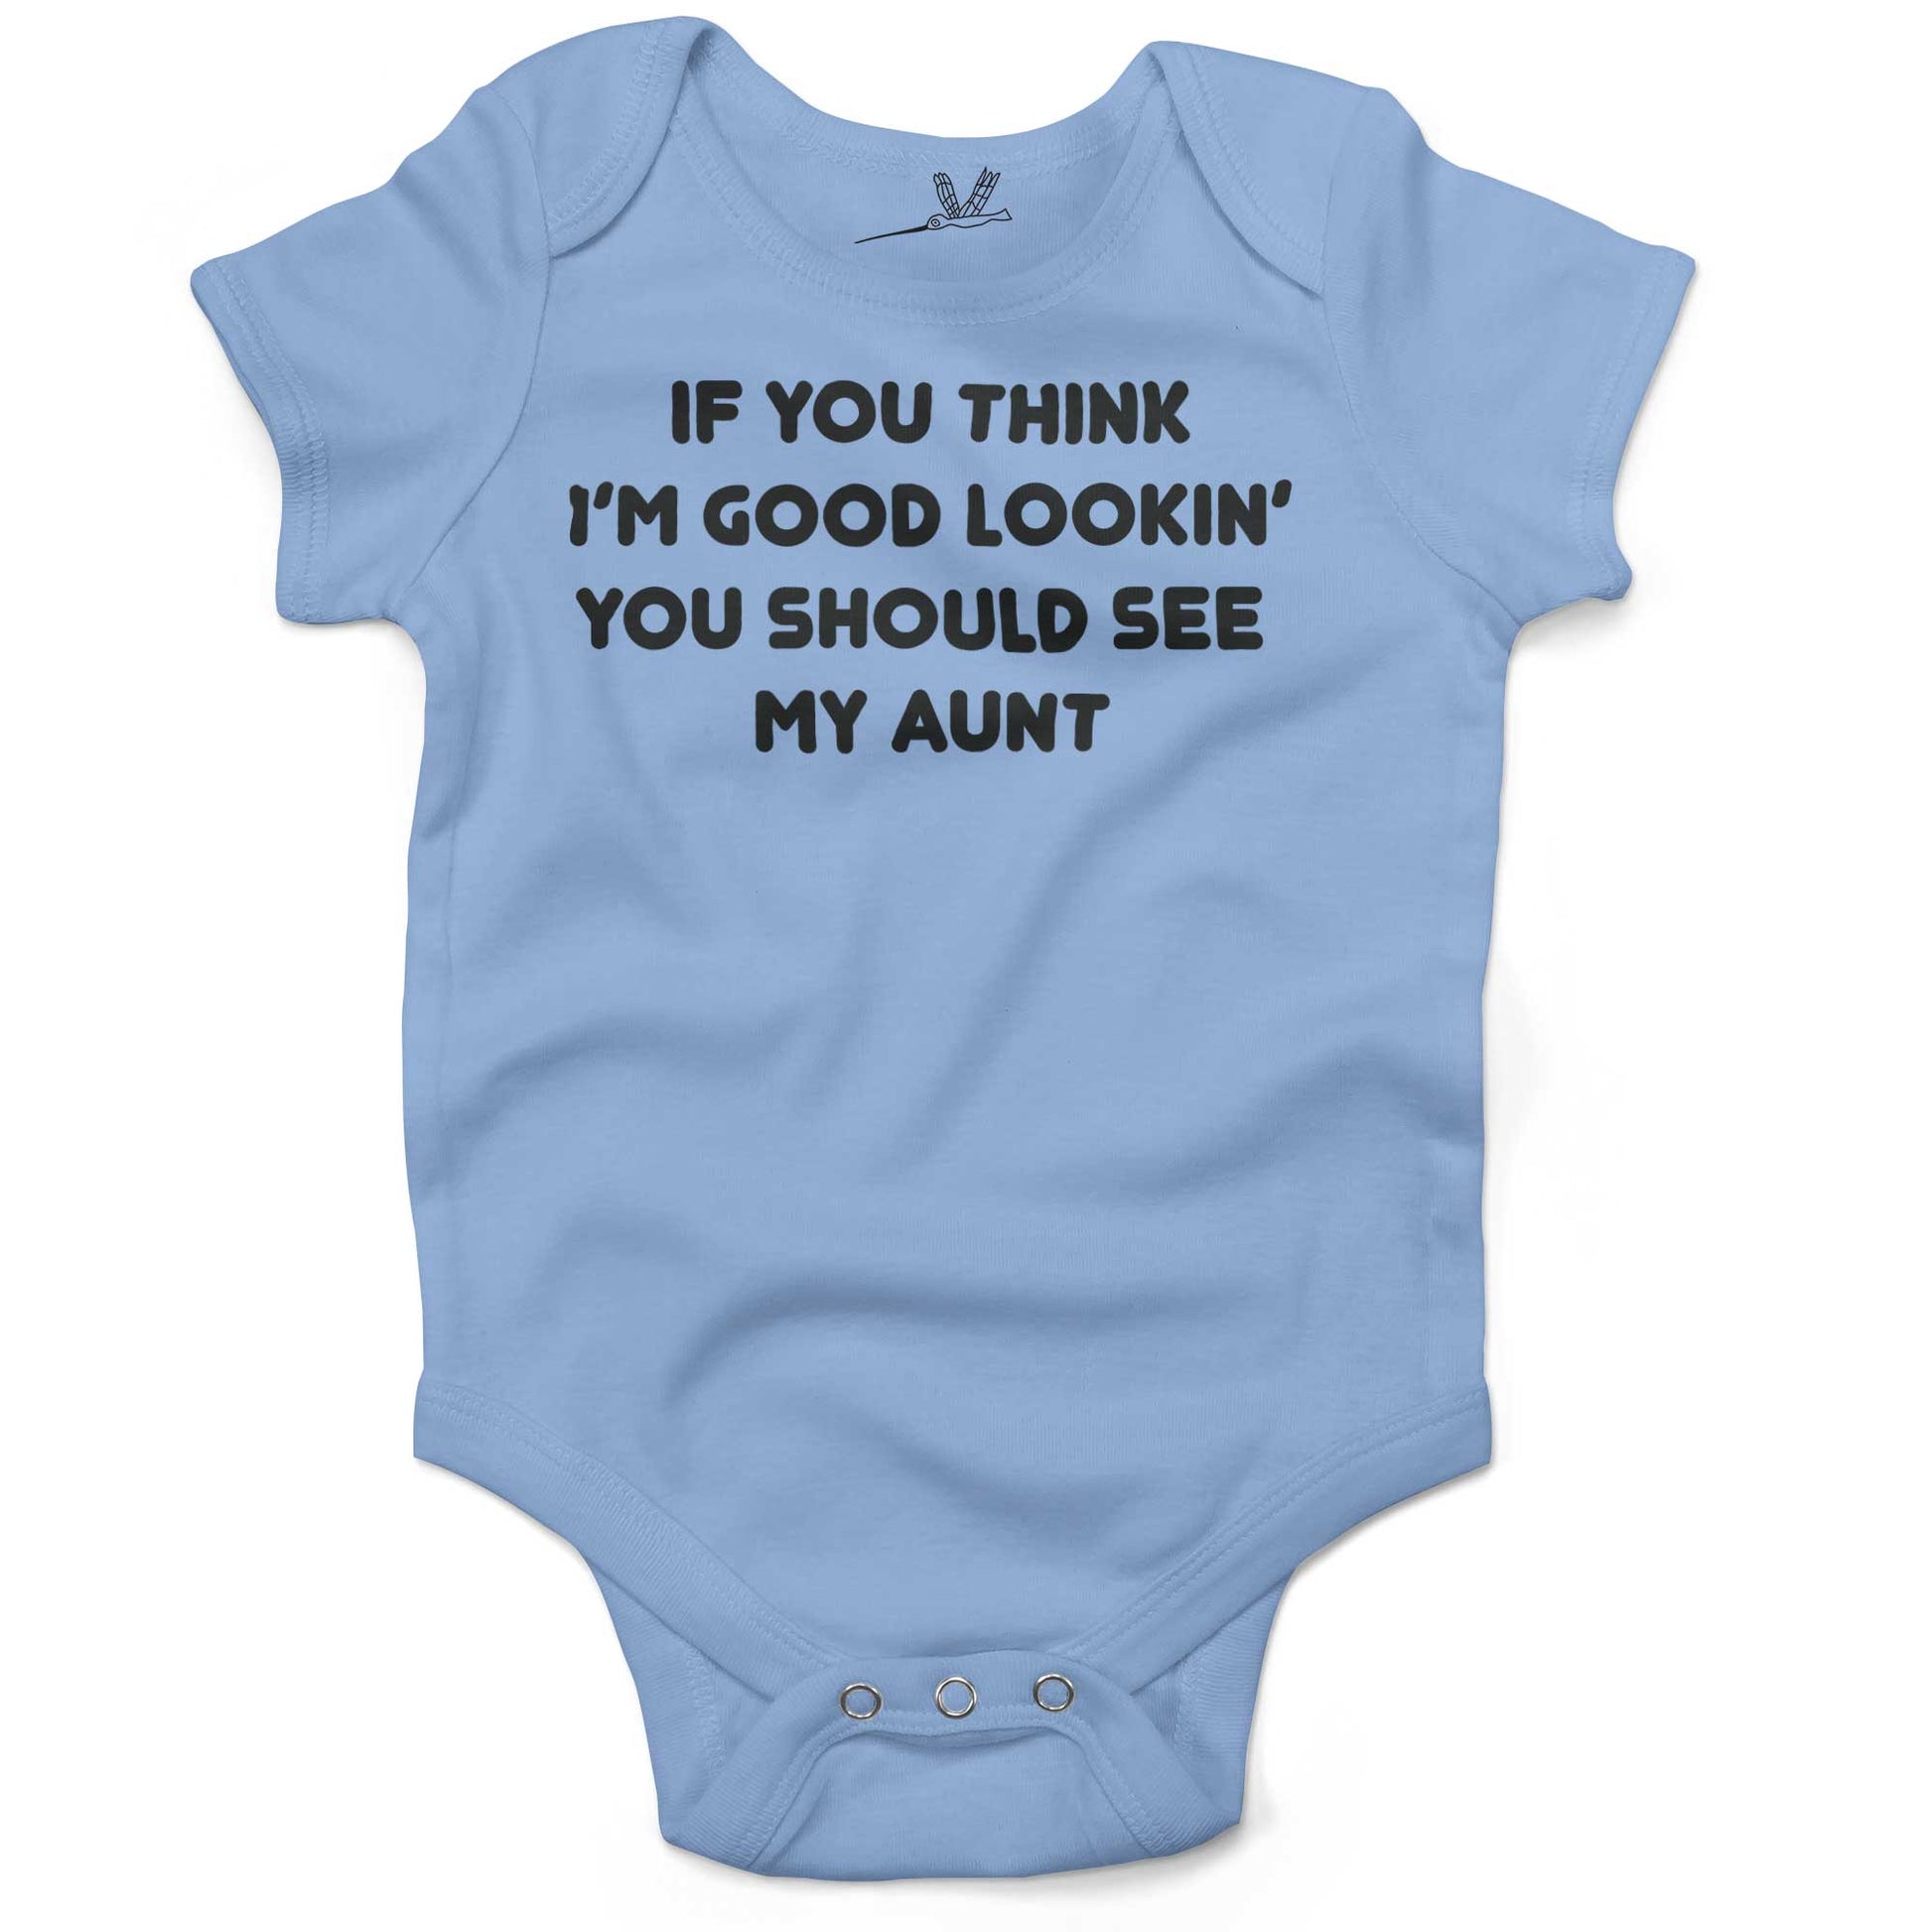 If You Think I'm Good Lookin' You Should See My Aunt Infant Bodysuit or Raglan Tee-Organic Baby Blue-3-6 months